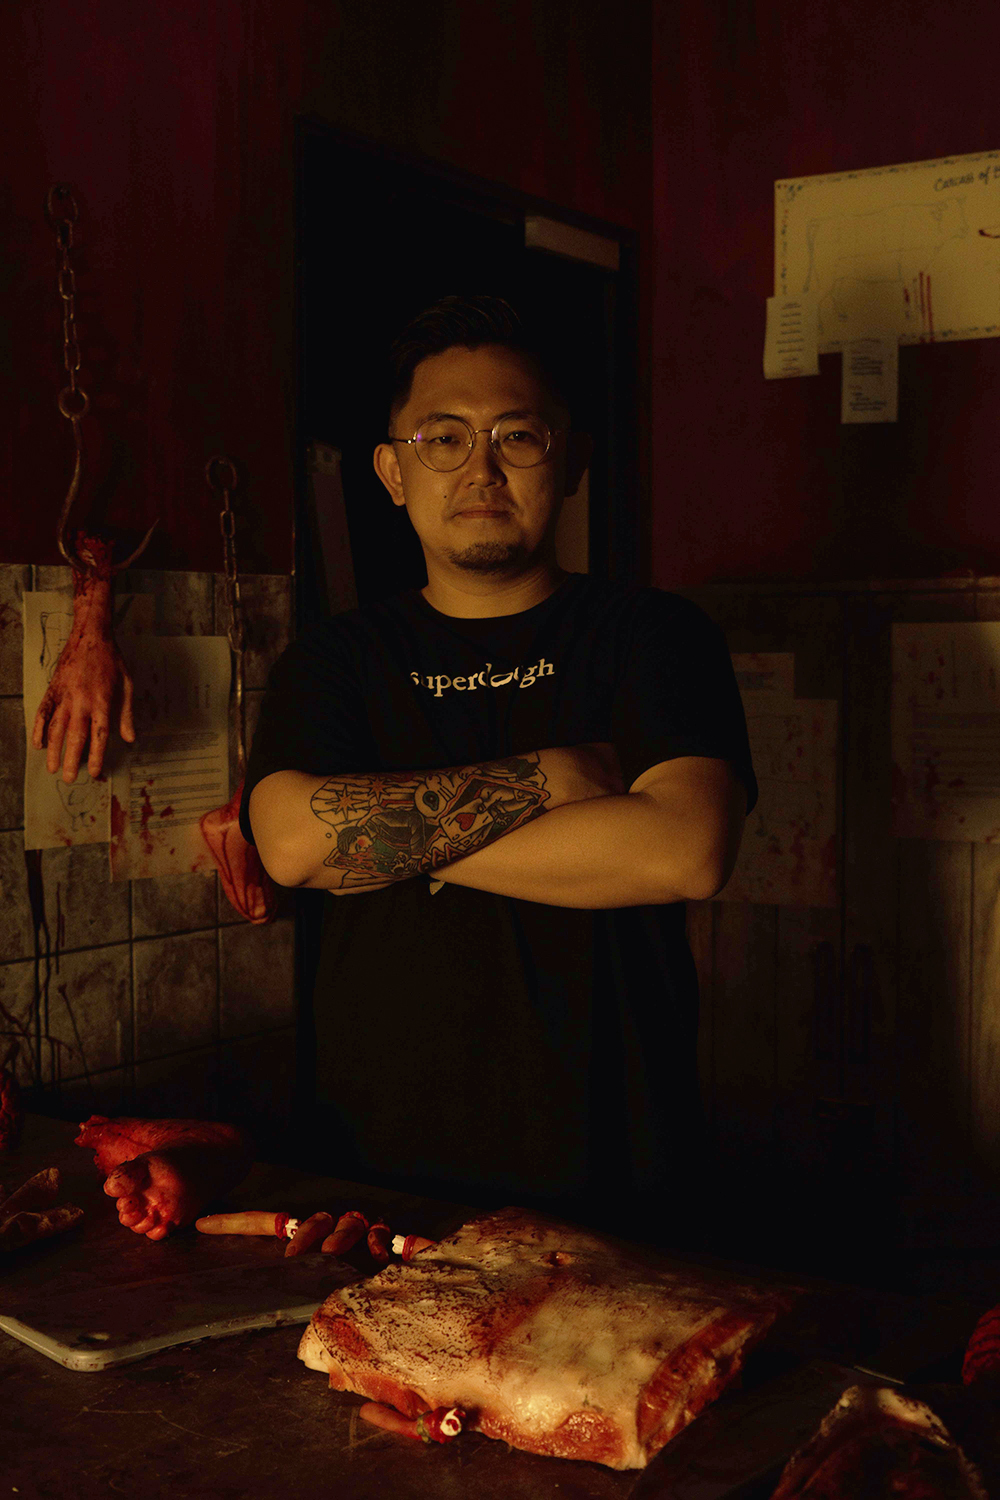 This m’sian engineer quit his 9-5 job to create better escape room games for m’sians to enjoy | weirdkaya